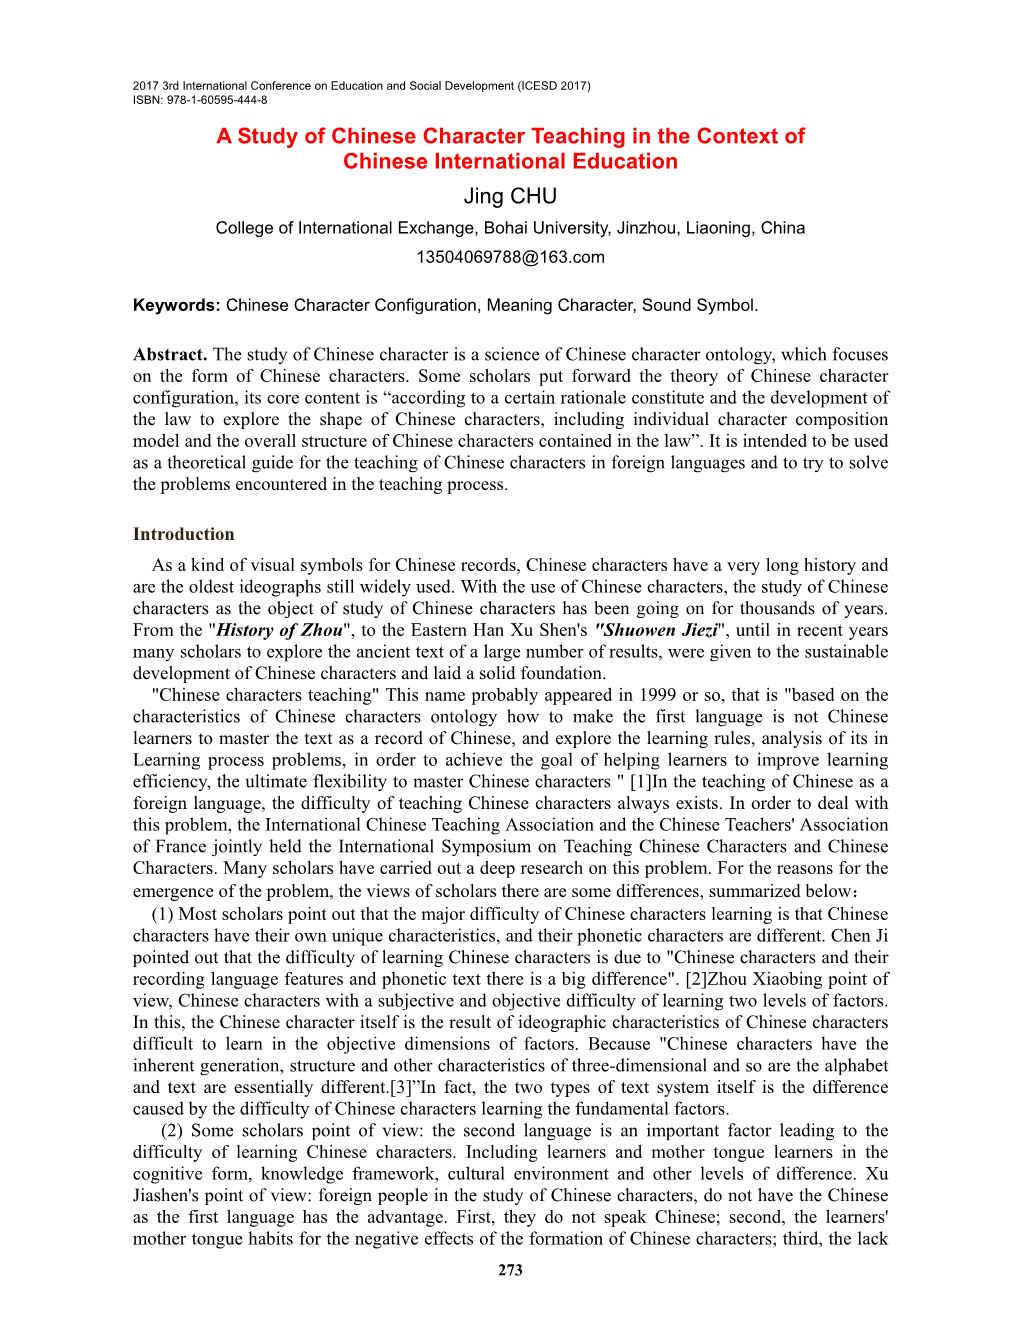 A Study of Chinese Character Teaching in the Context of Chinese